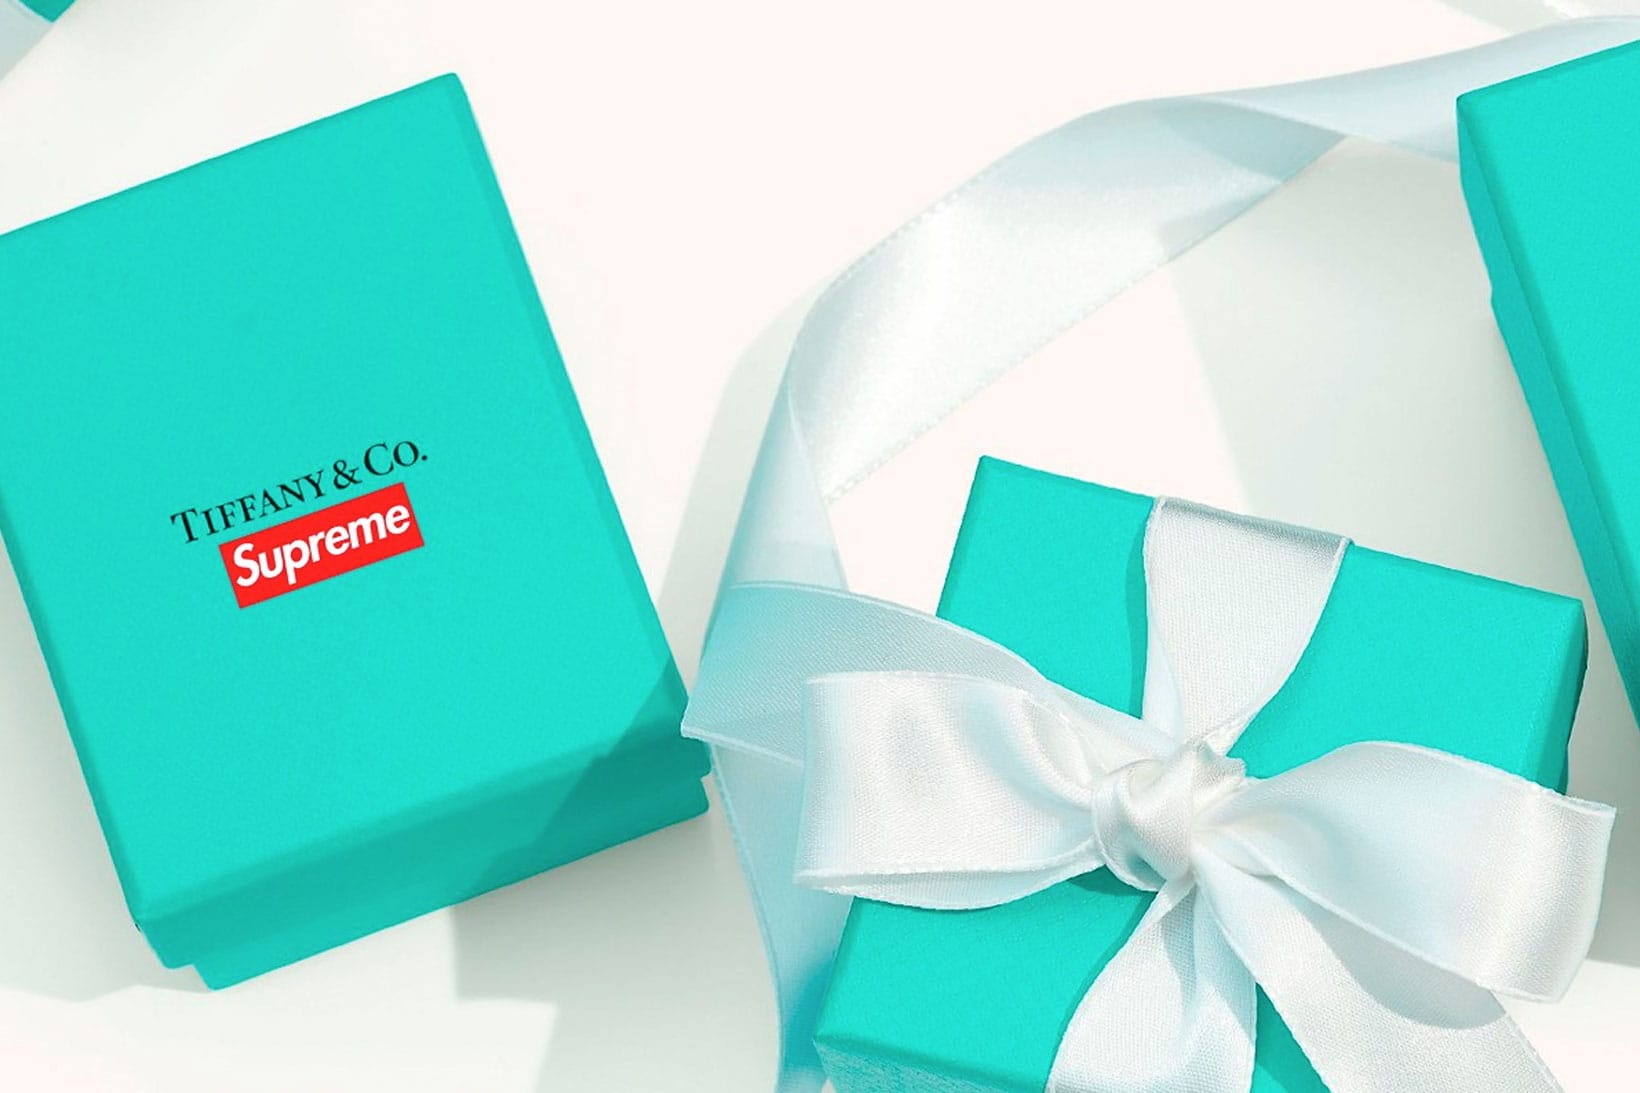 Supreme/Tiffany & Co As mentioned a few weeks ago, a collaboration has been  in the works from these two which could lead to an interesting… | Instagram